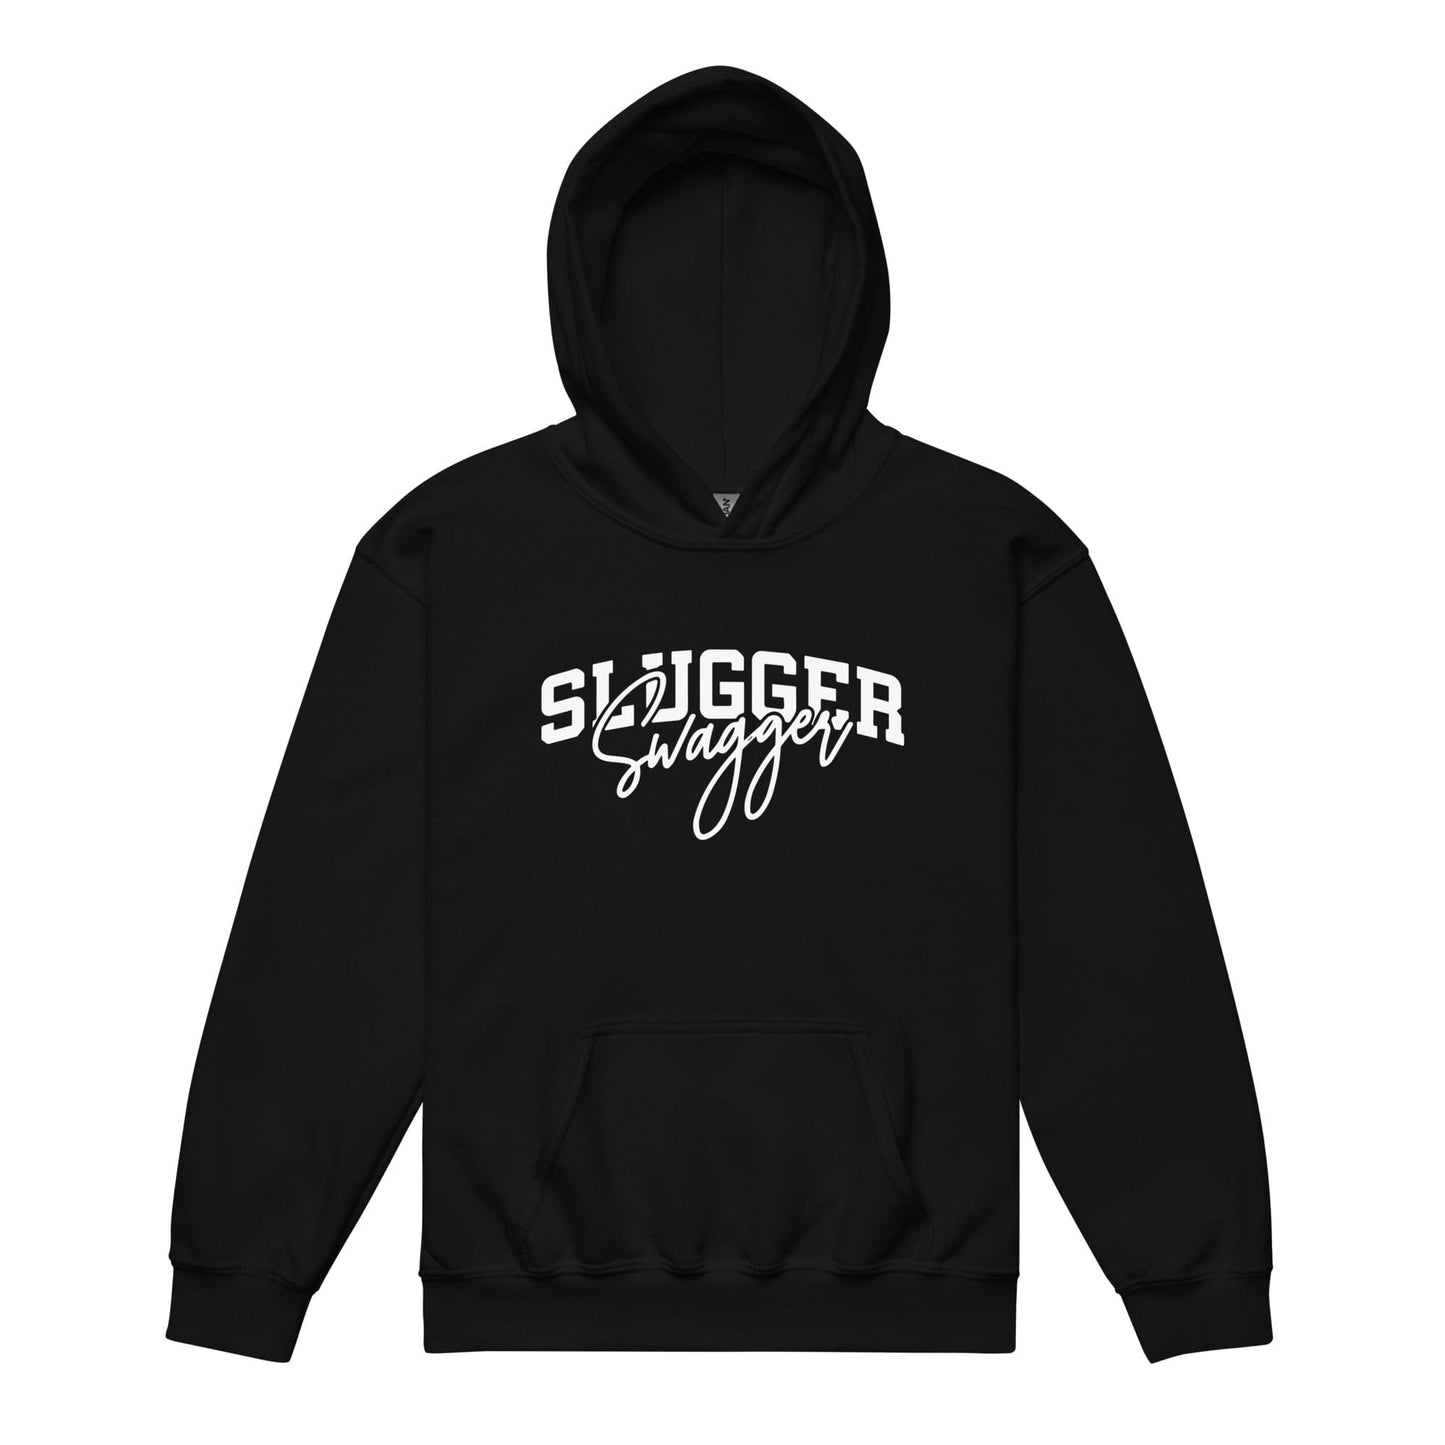 Slugger Swagger - Youth Hoodie